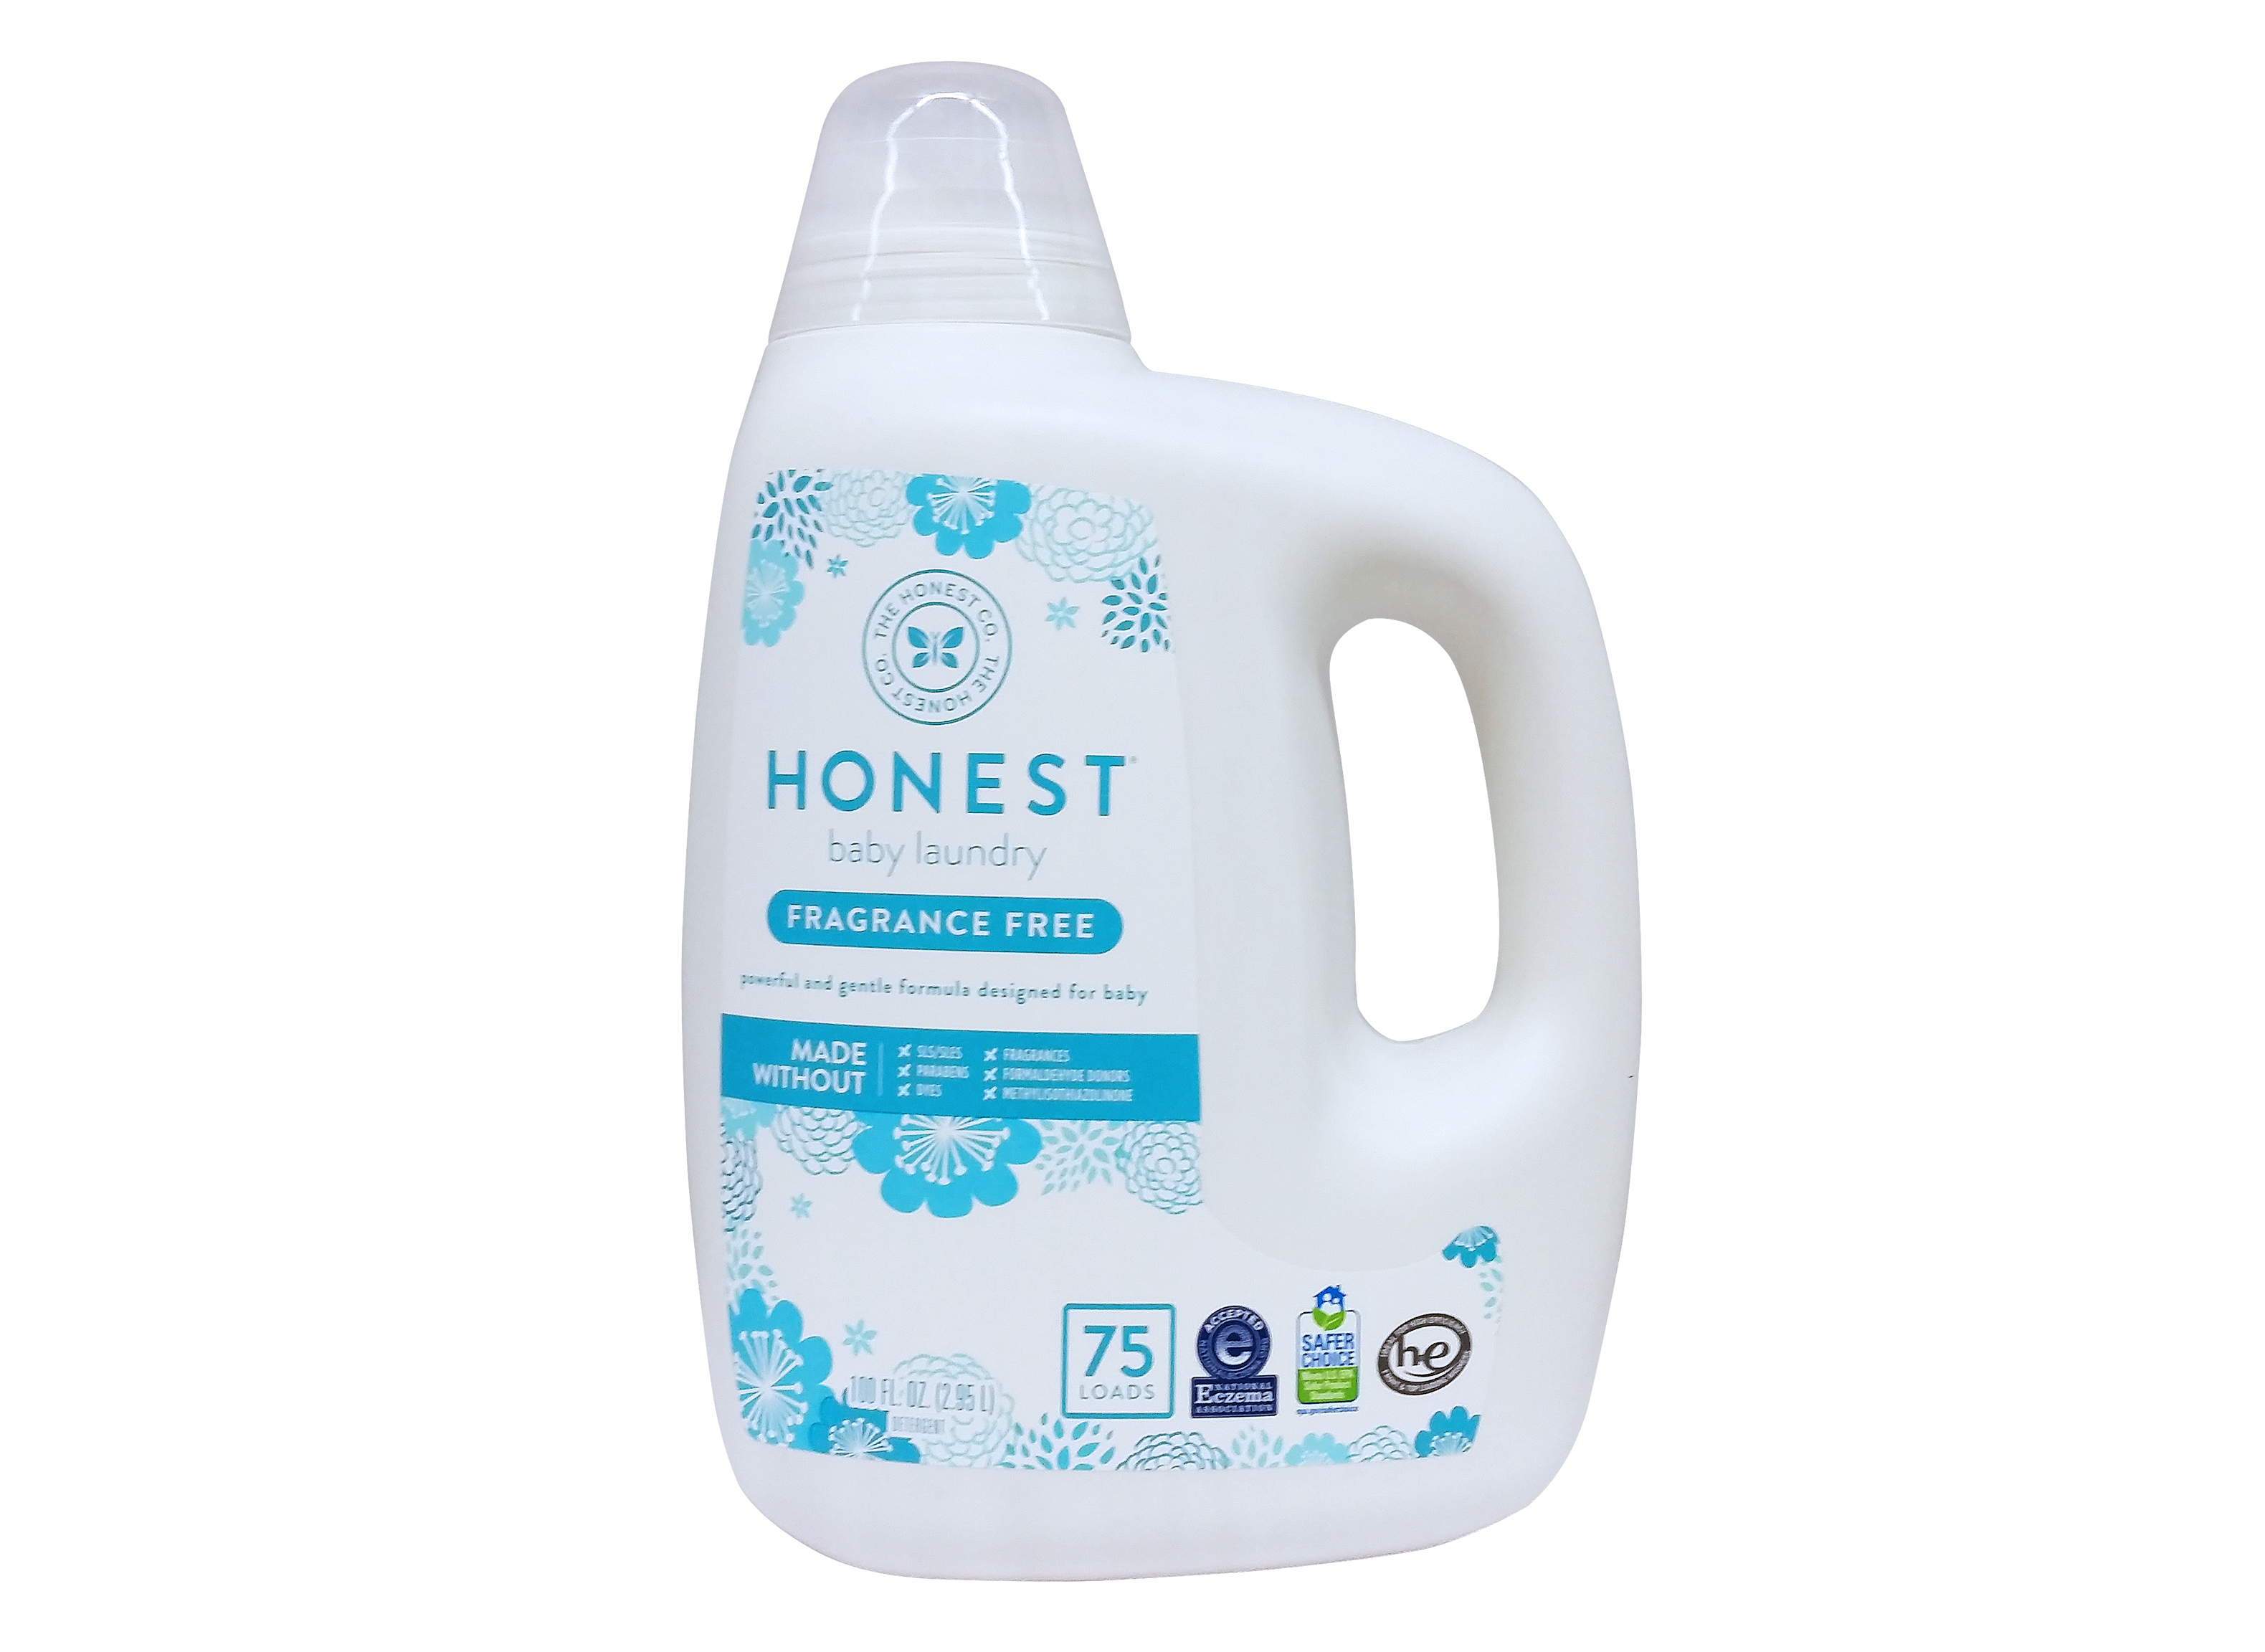 https://crdms.images.consumerreports.org/prod/products/cr/models/394683-laundry-detergent-for-he-and-standard-washers-tested-in-he-machines-the-honest-company-baby-laundry-fragrance-free-60053.png